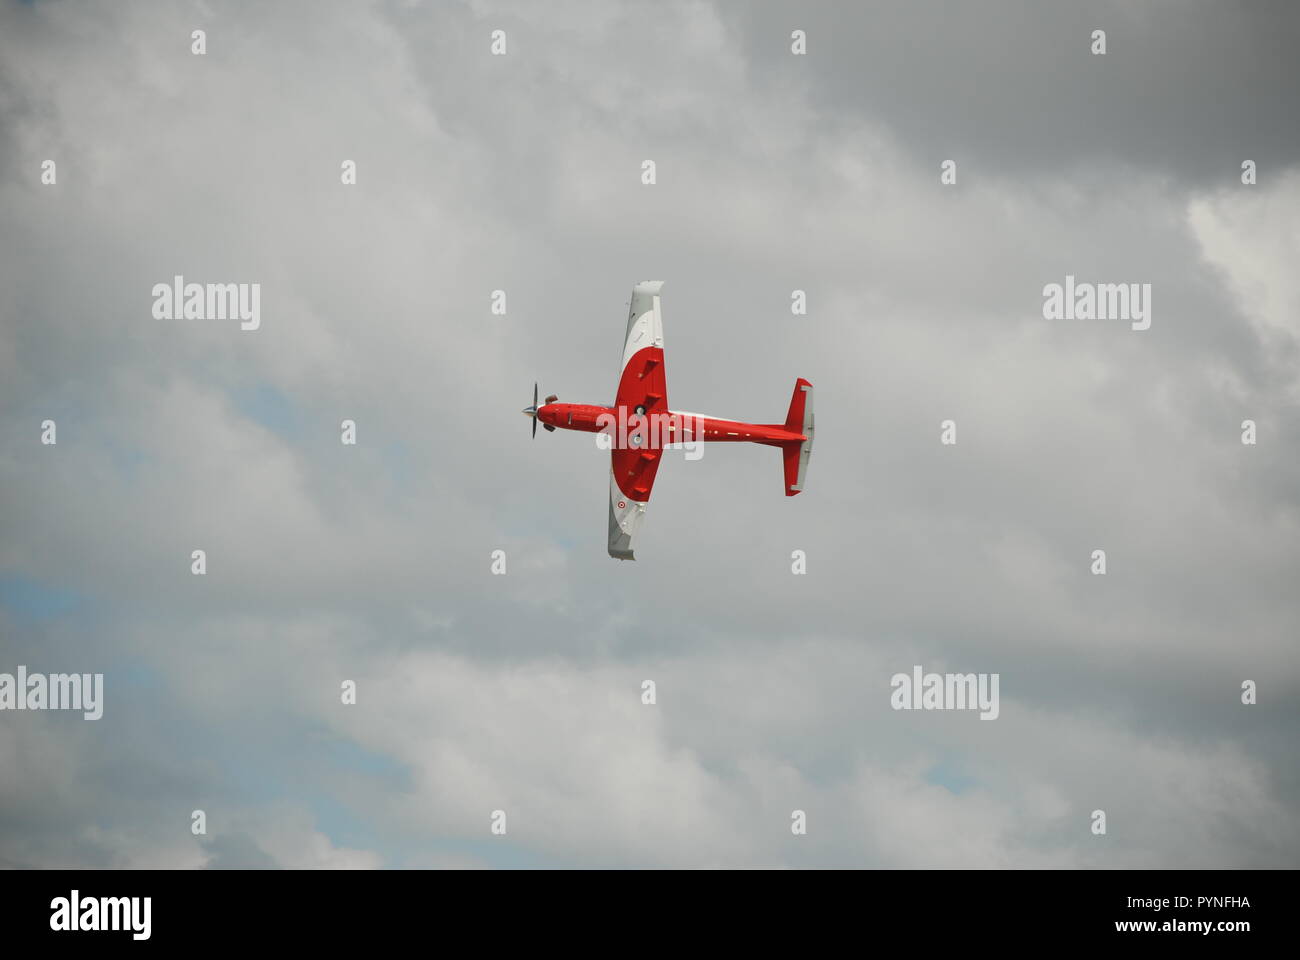 New Generation Basic Trainer HÜRKUŞ (Free Bird) over the Istanbul, IGA New Airport during the Teknofest Technology and Aviation Fair on September 20, Stock Photo